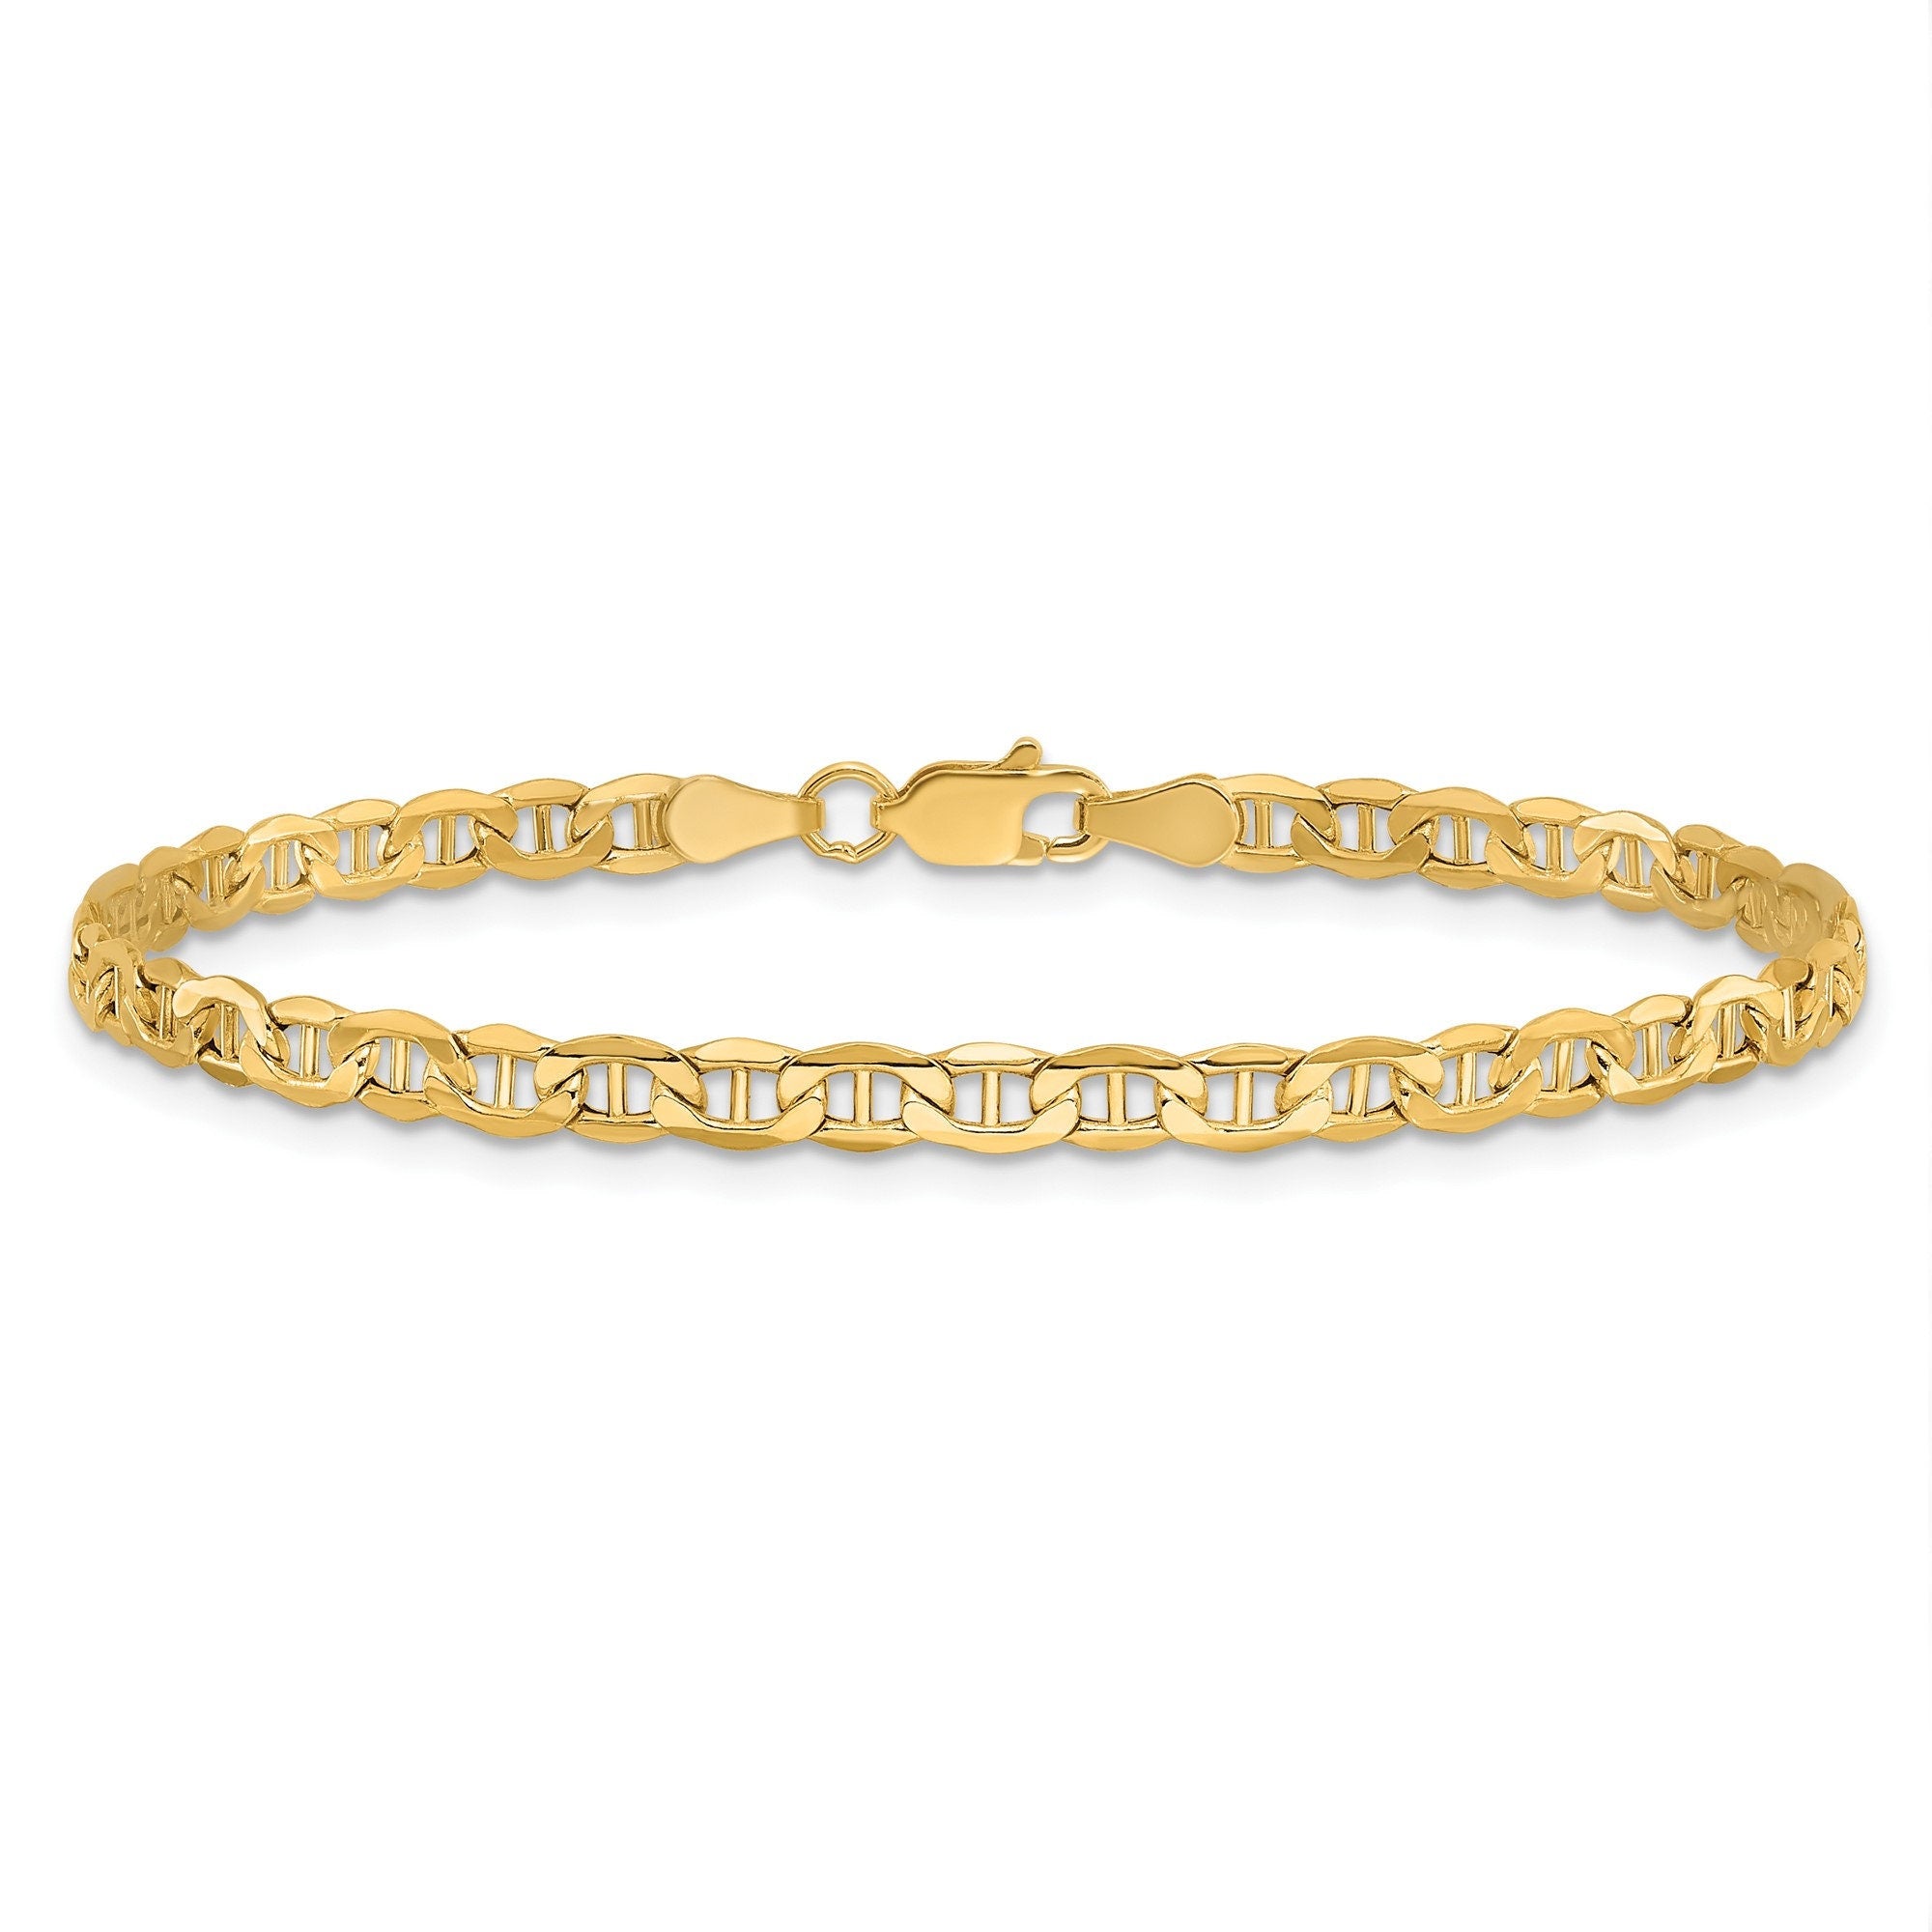 Buy You And Your Untimely Yawns Anklets In Gold Plated 925 Silver from  Shaya by CaratLane